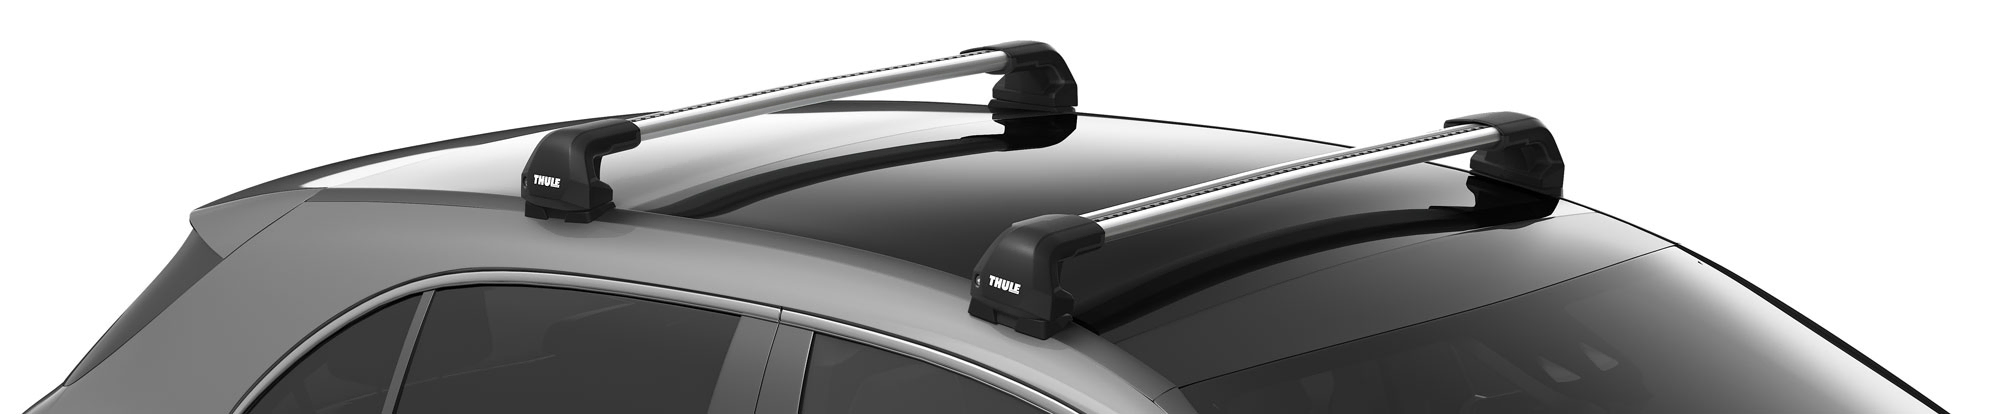 Thule Roof Rack and Bars for sale online